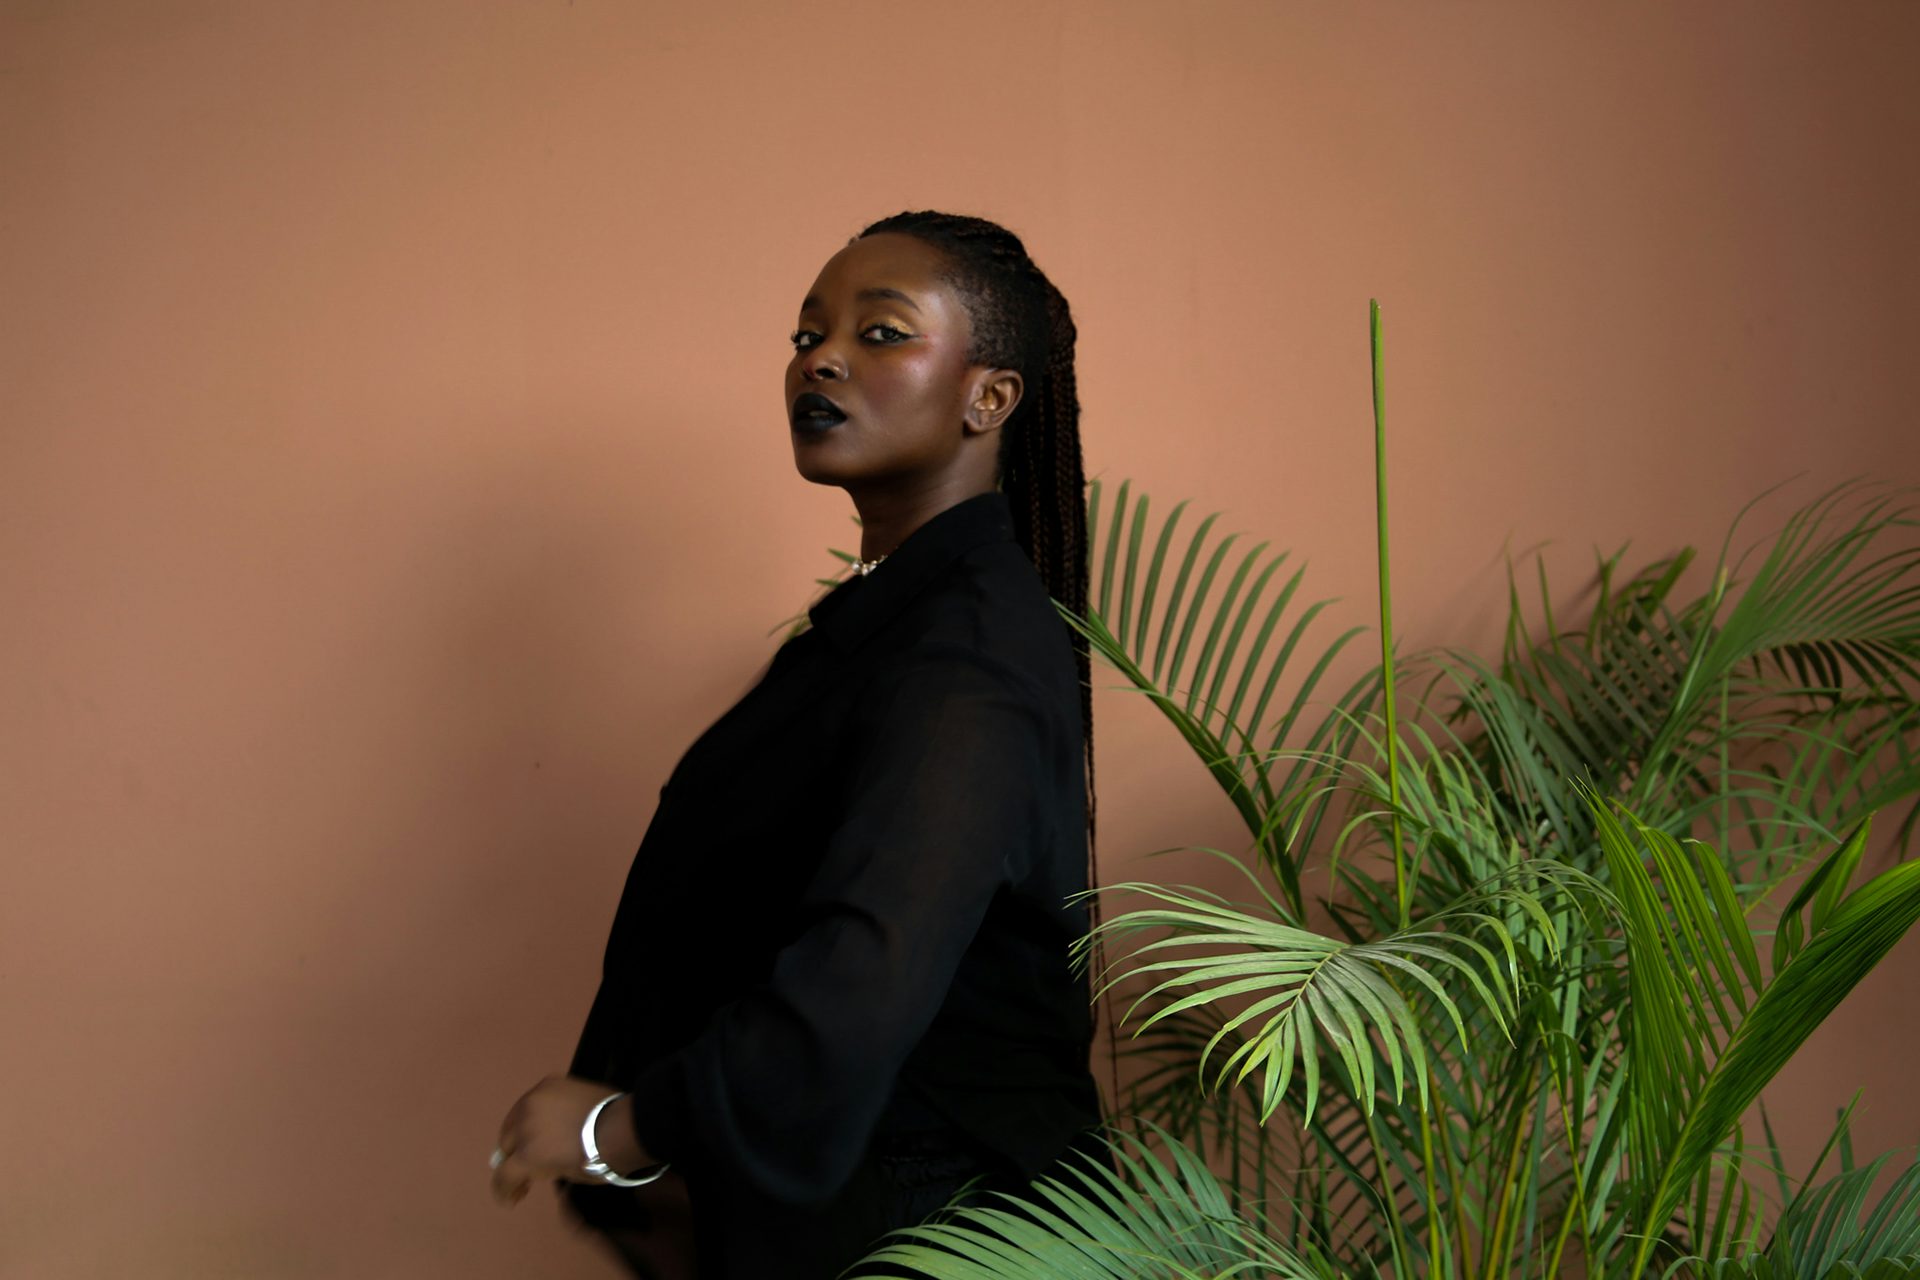 Photograph of Artist and writer Eloghosa Osunde stood next to a plant